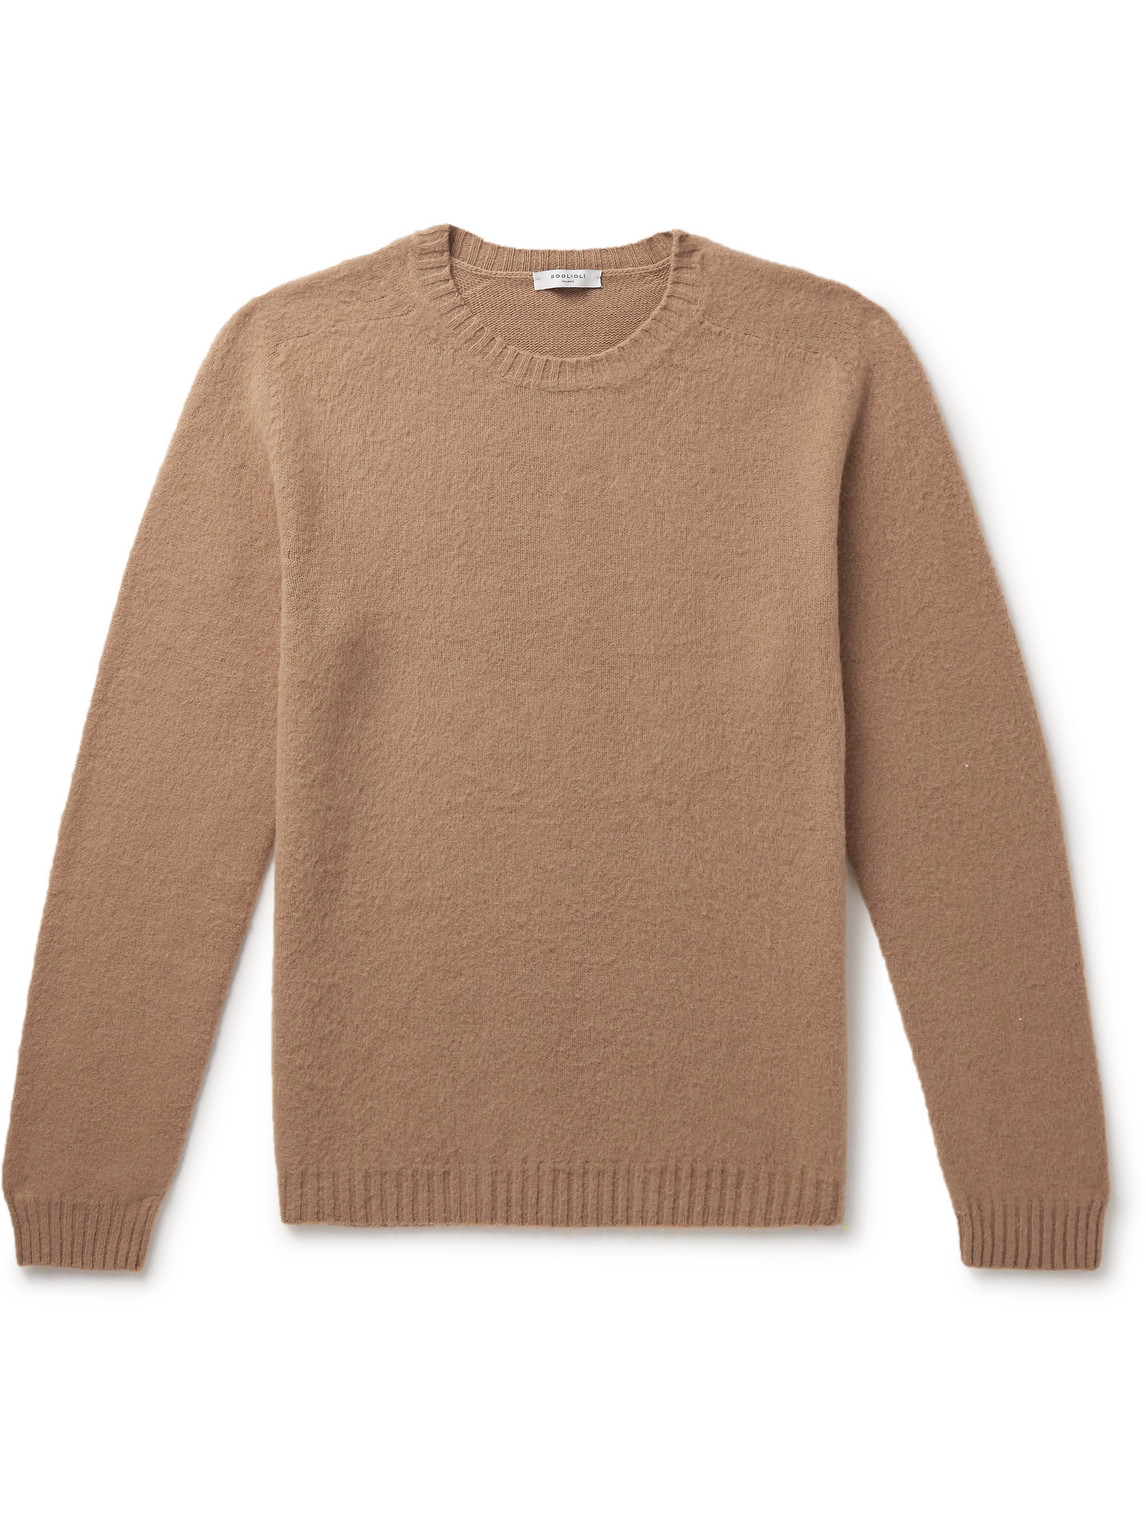 Slim-Fit Brushed Wool and Cashmere-Blend Sweater